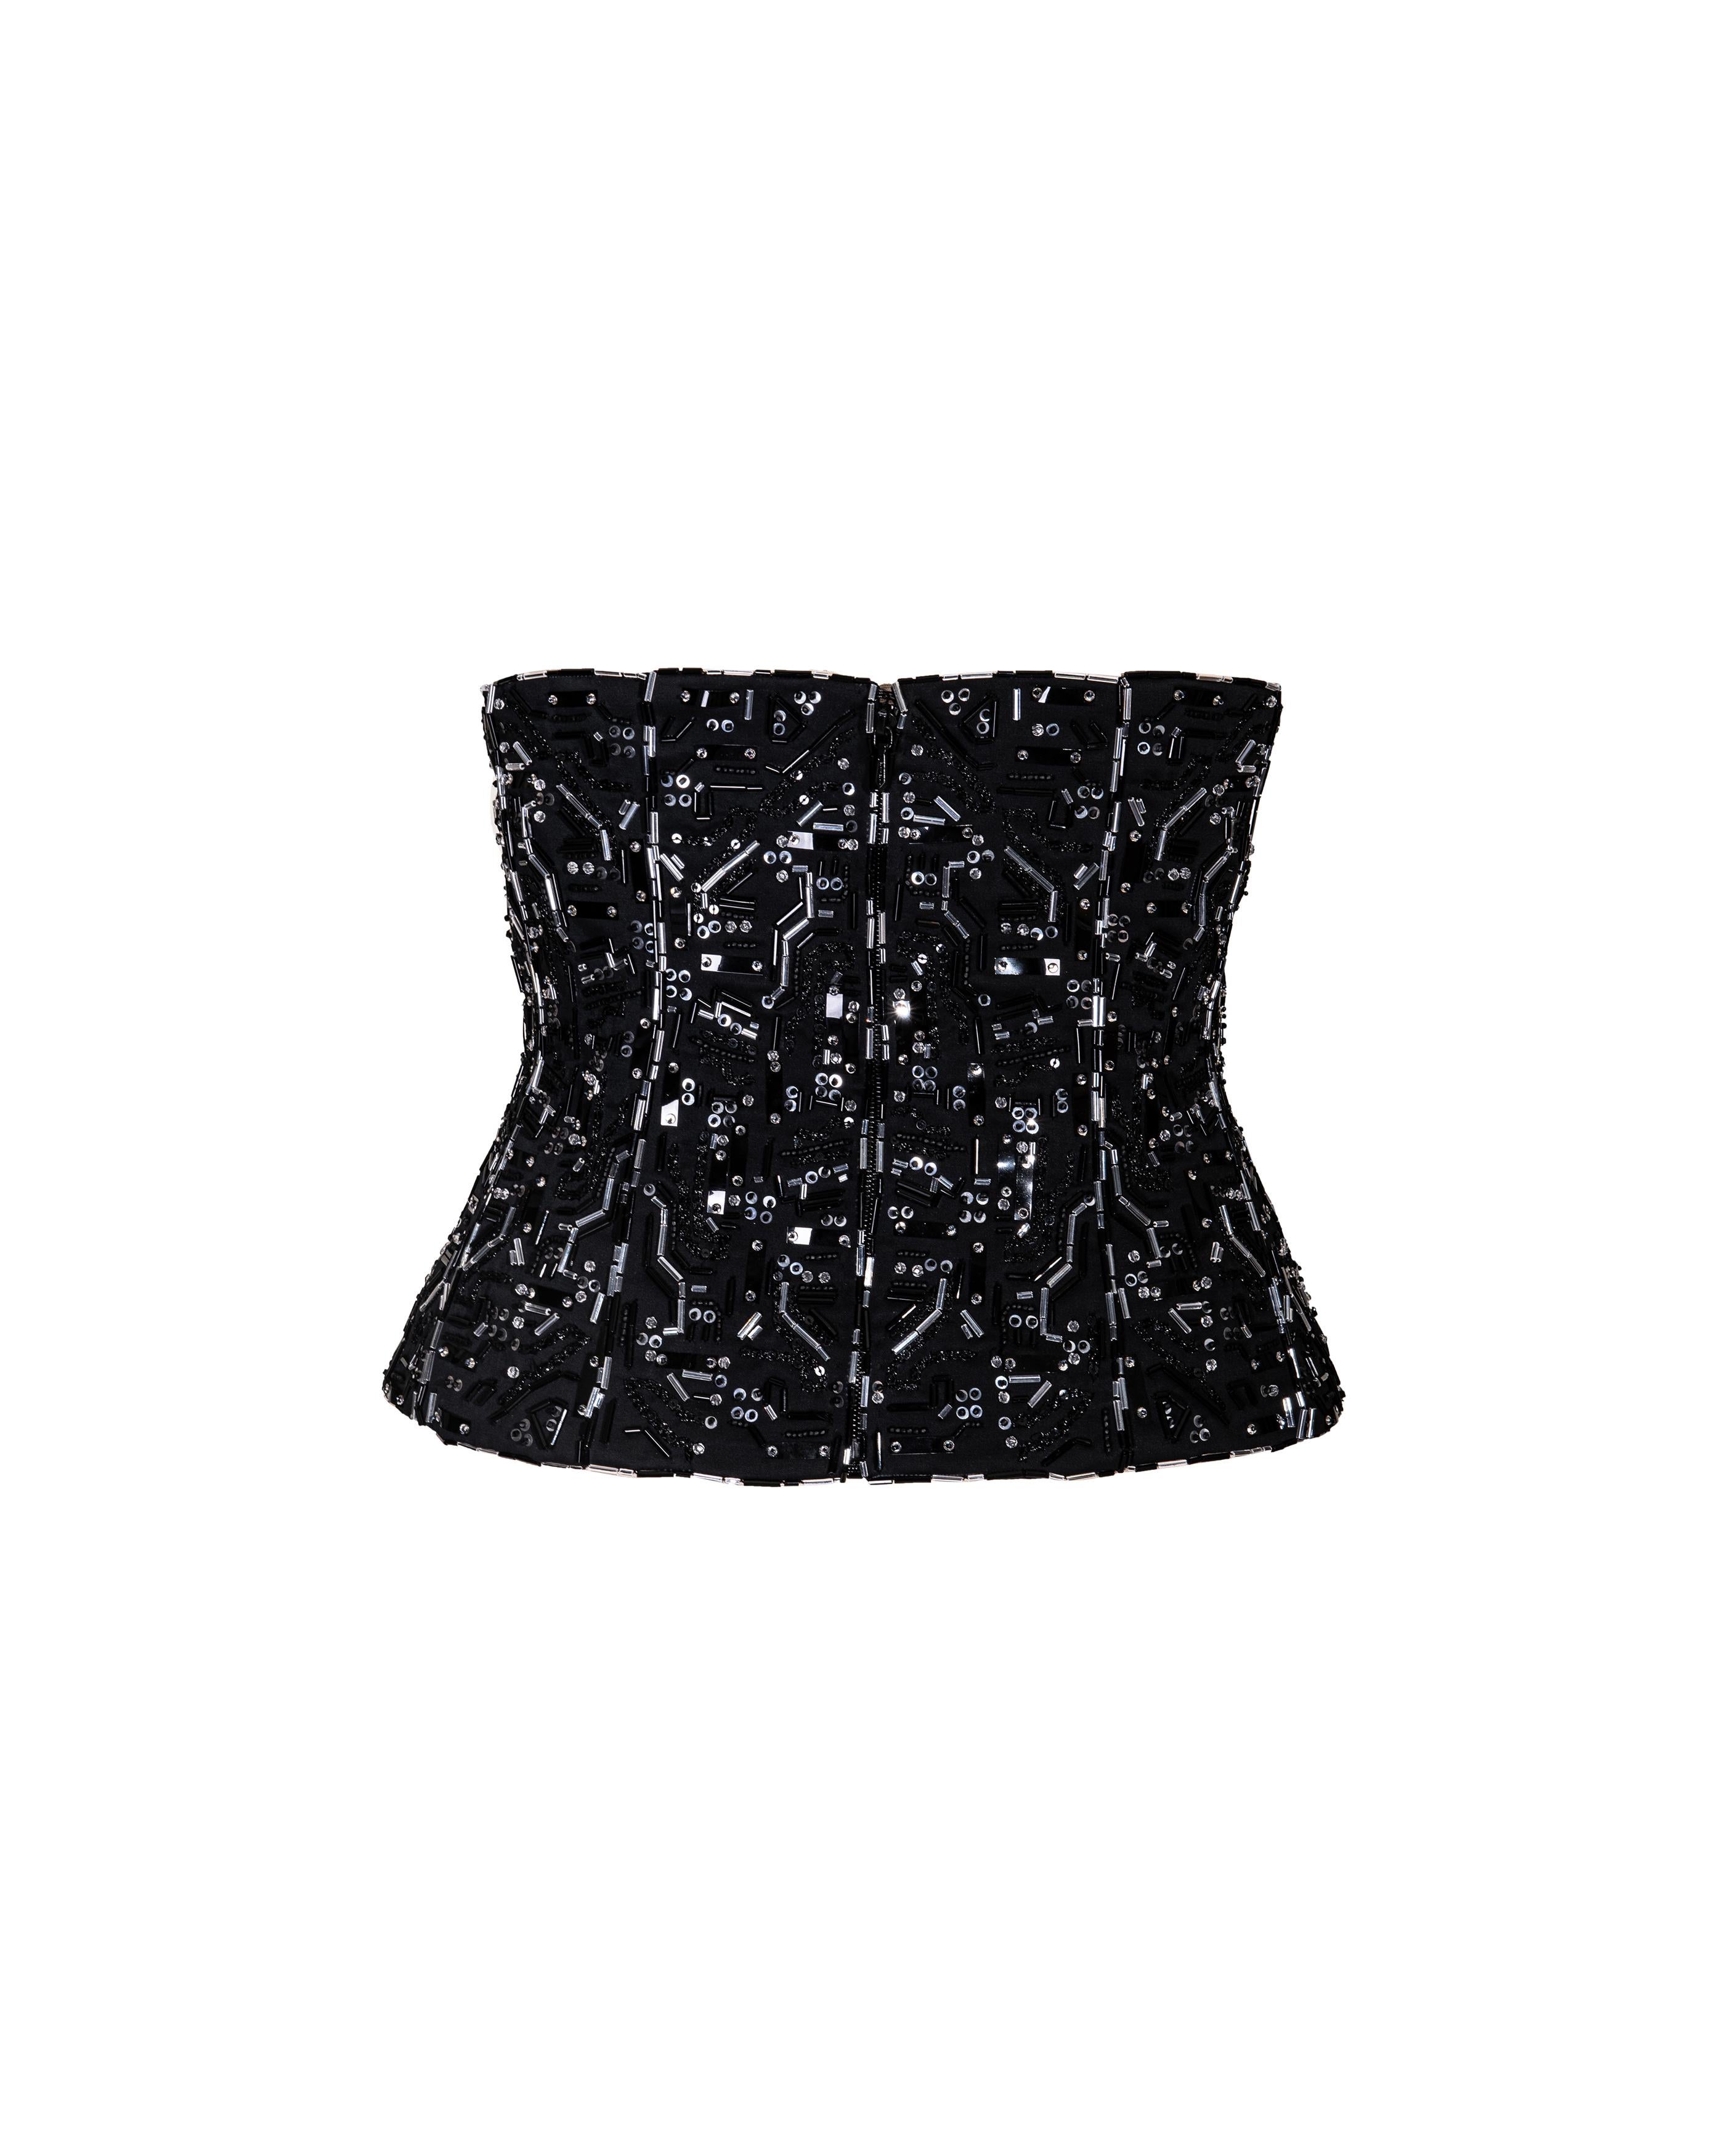 A/W 1999 Givenchy by Alexander McQueen Circuit Board Black Embellished Corset For Sale 1